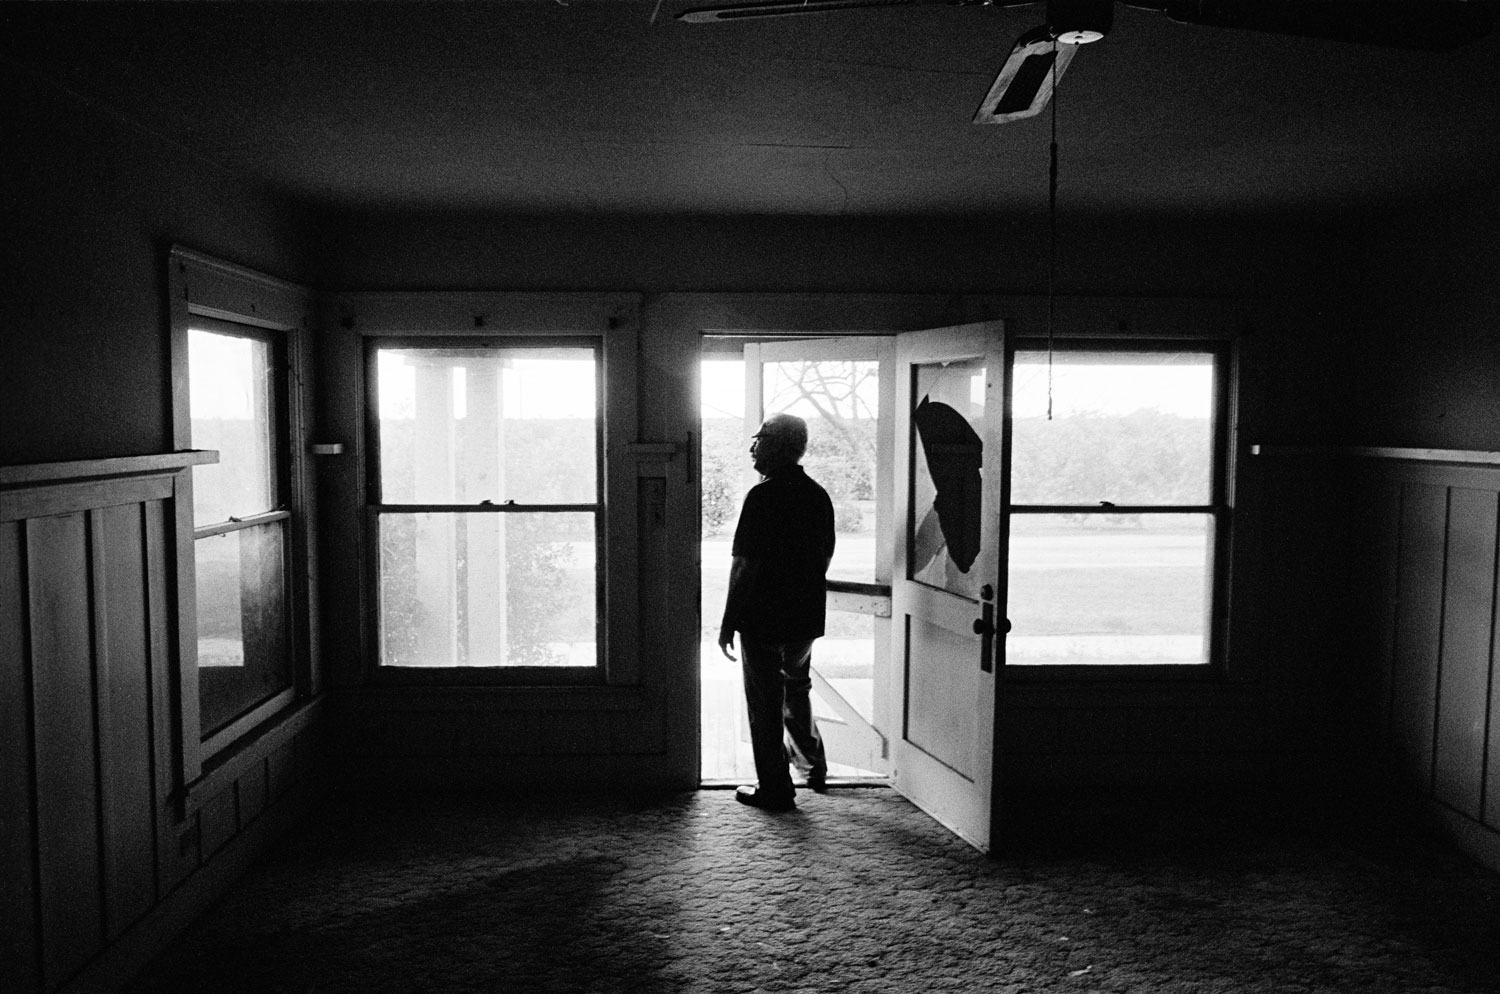 Jesse revisits the home where he grew up as a child, which is now abandoned. Woodlake, Calif., 2012.